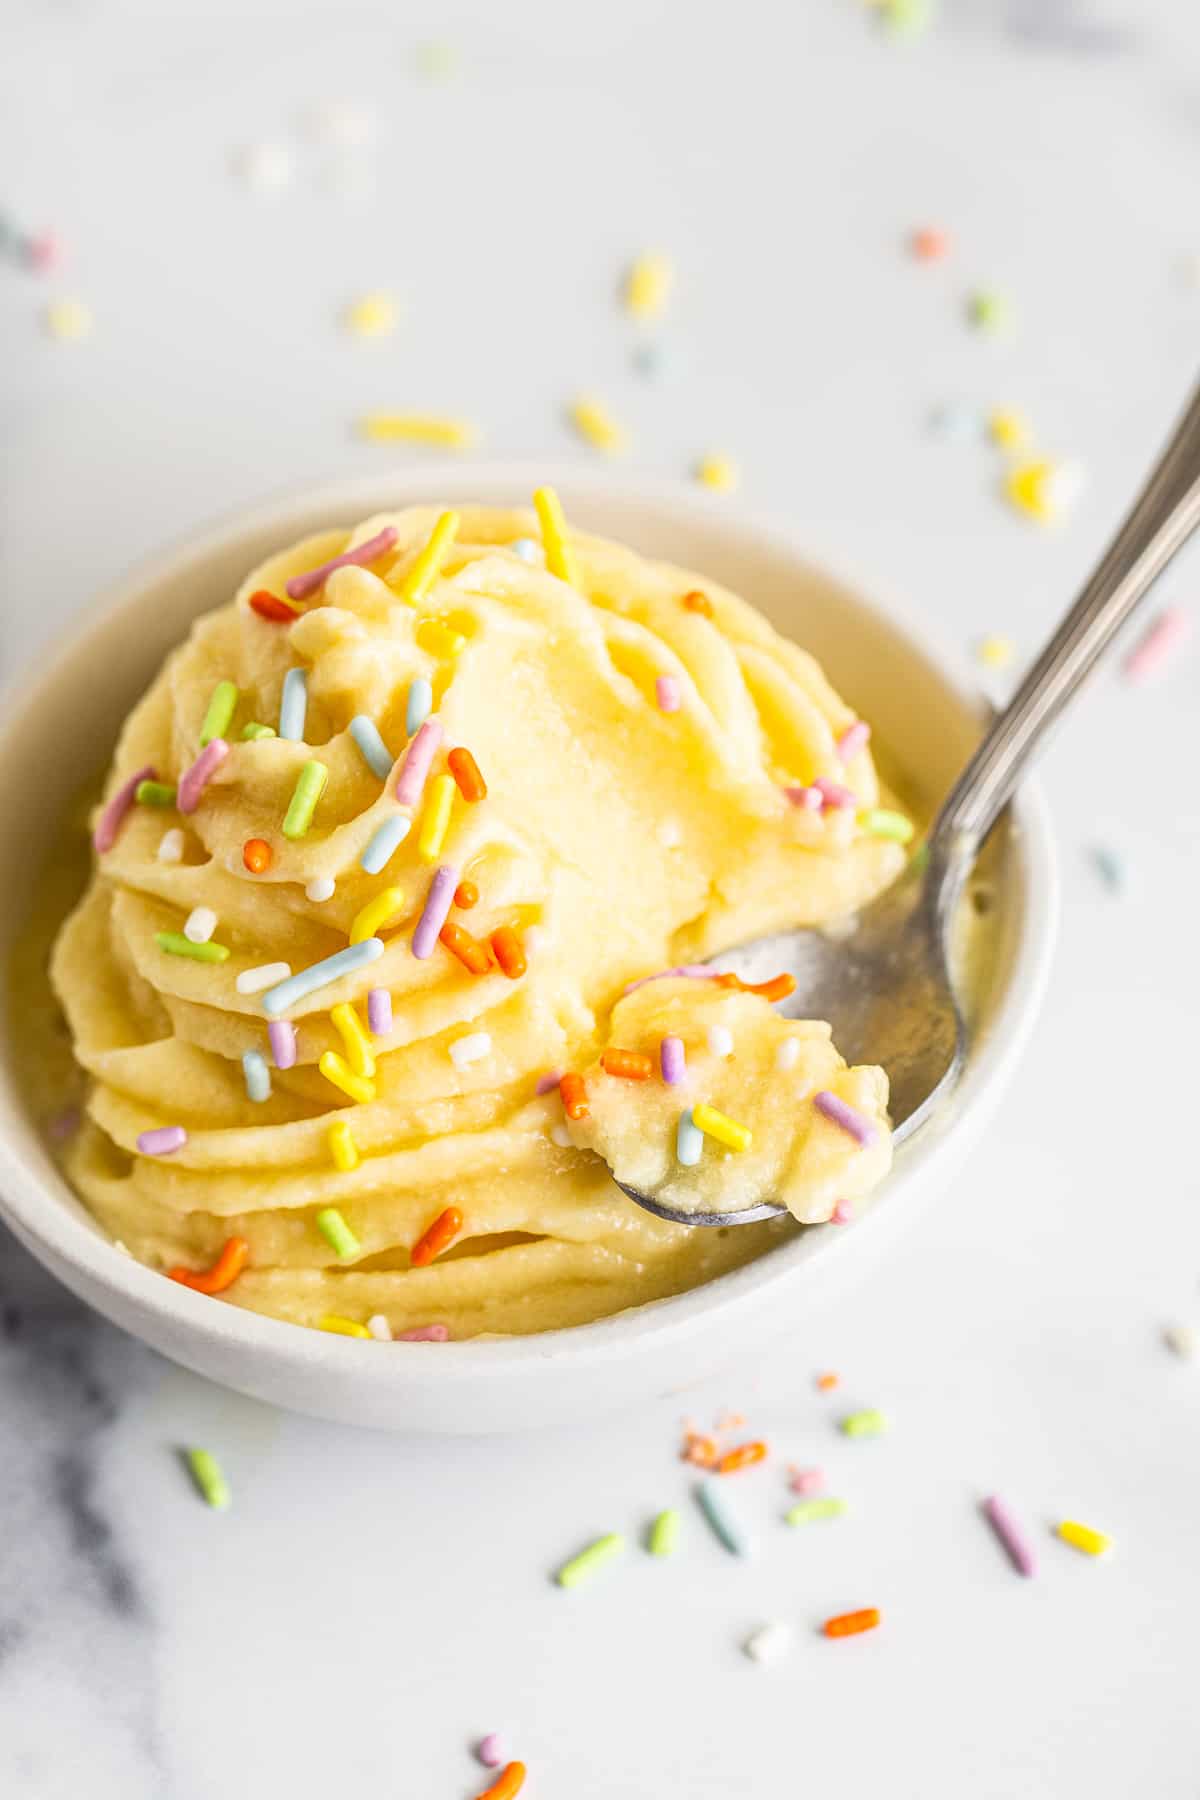 Dole Whip in a bowl with a spoon.